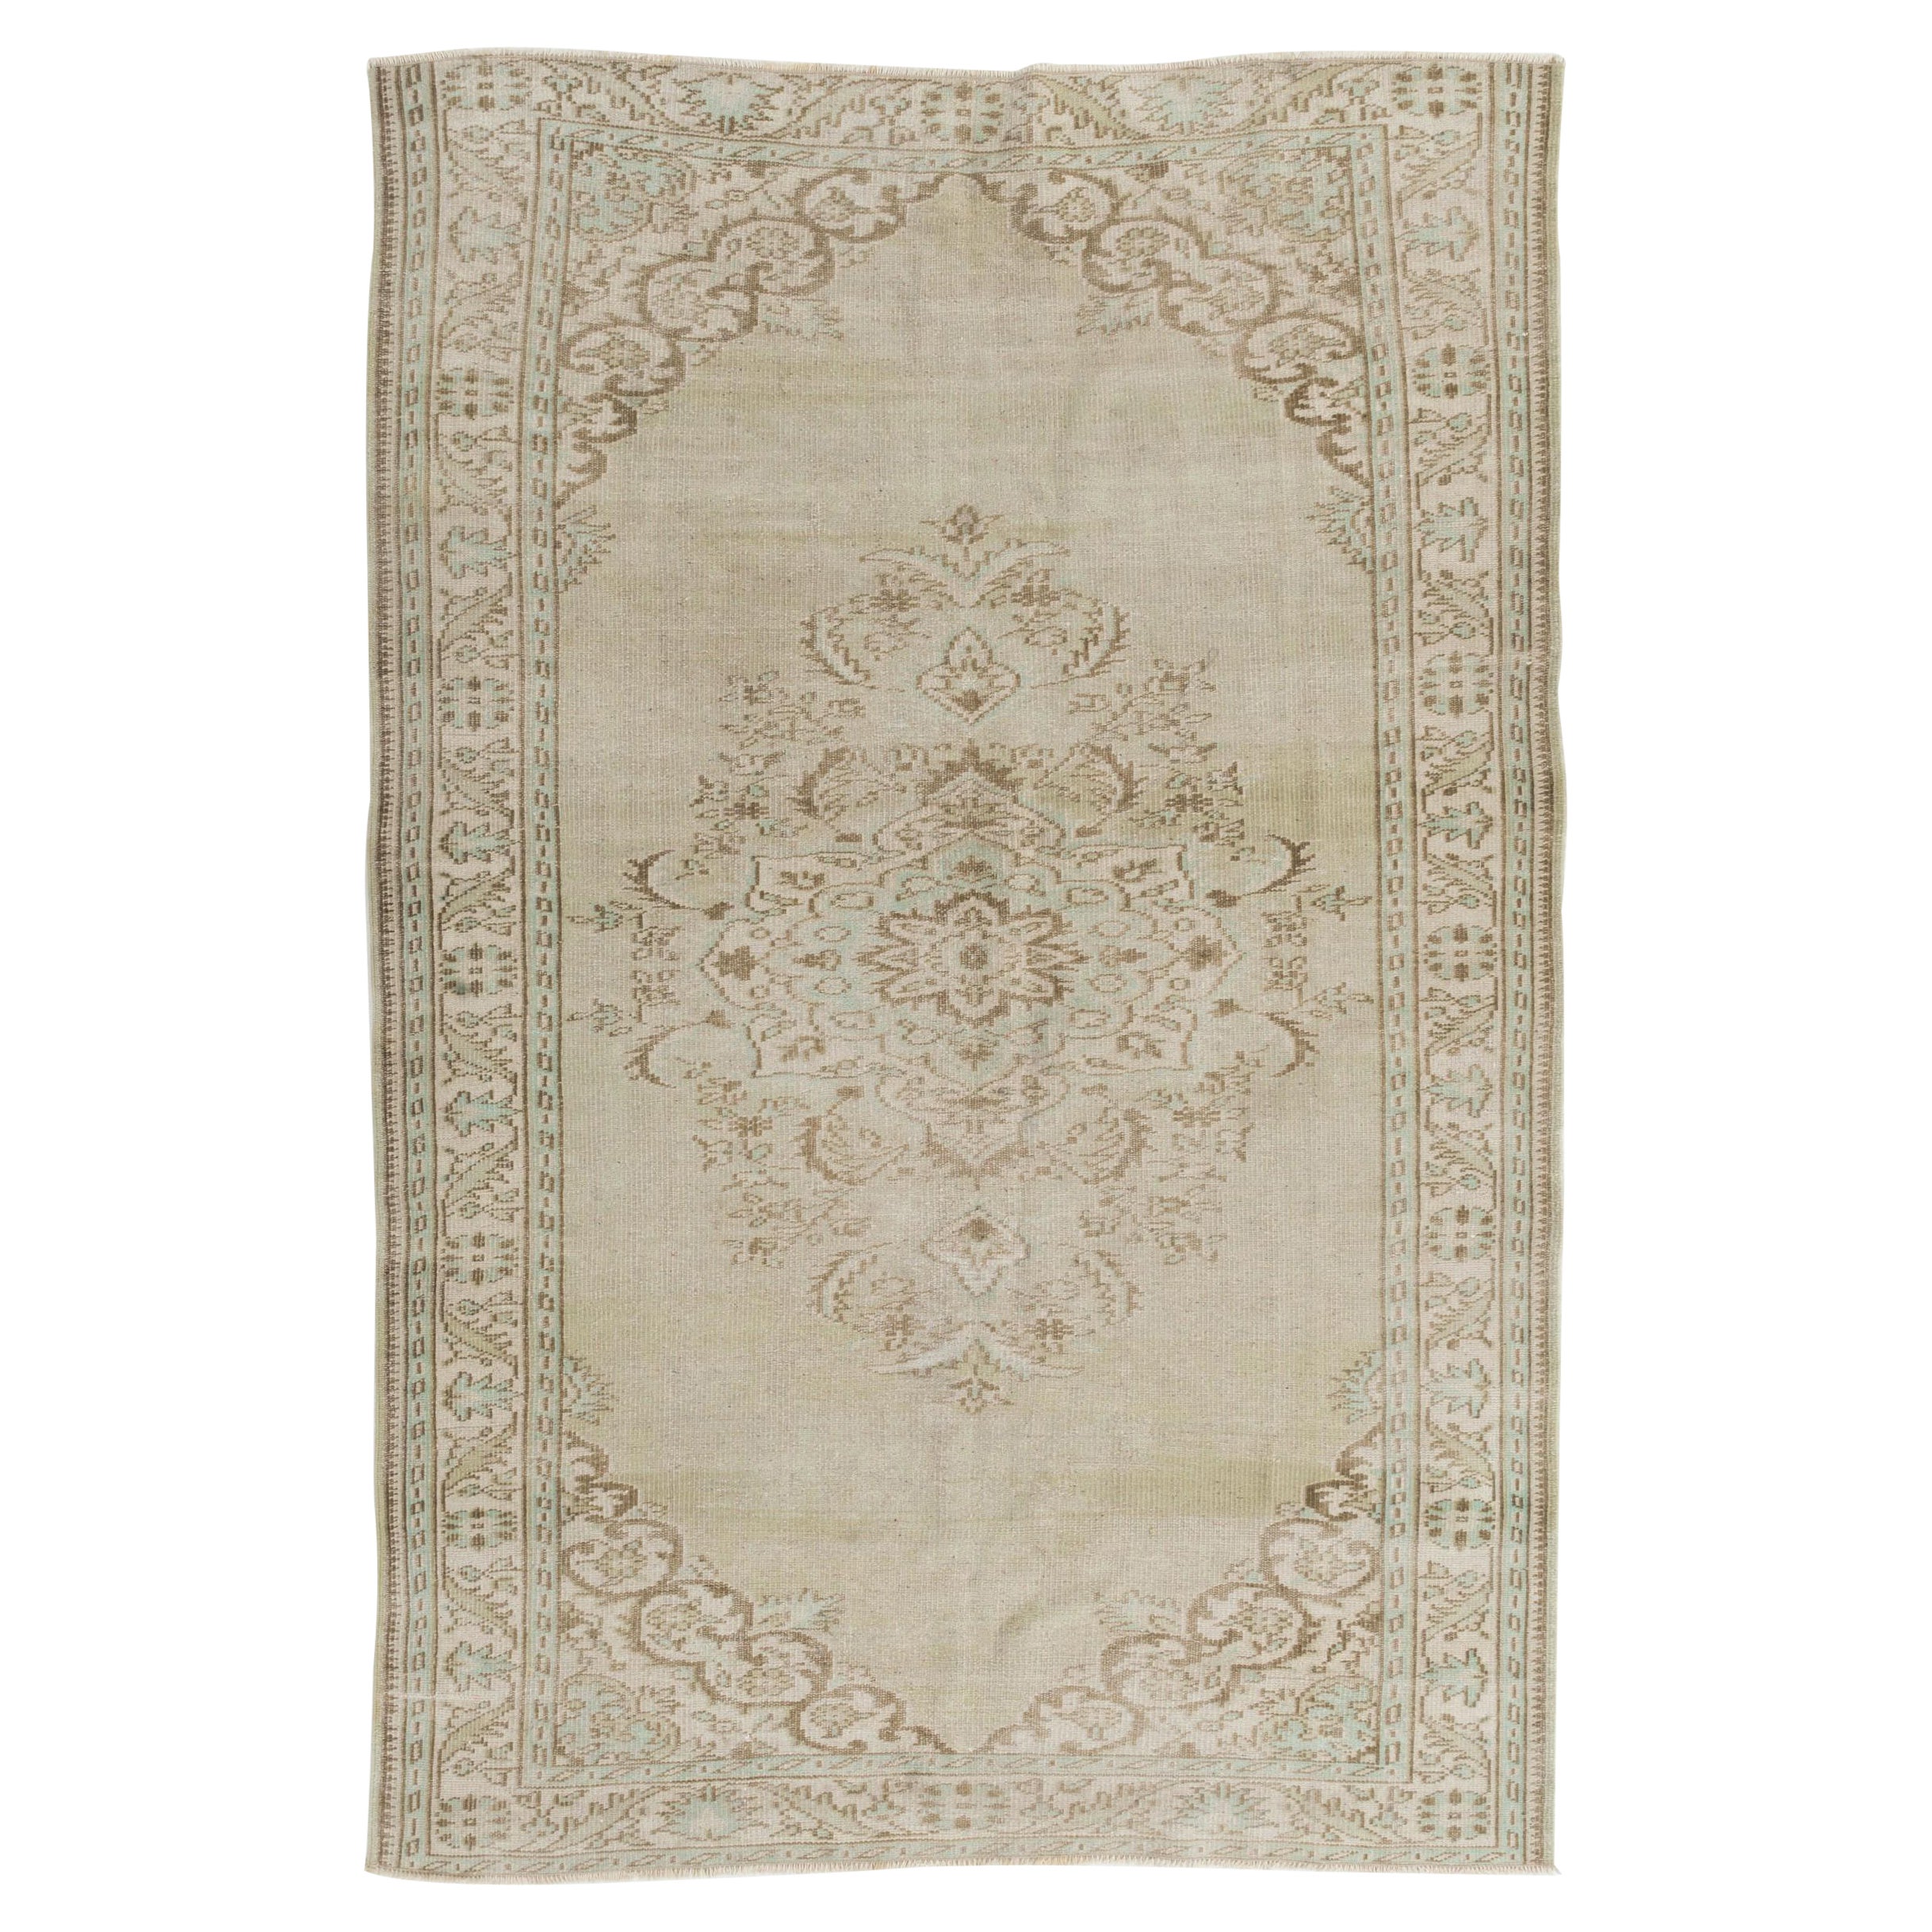 6x8.8 ft Hand-Made Vintage Anatolian Oushak Rug in Neutral Colors For Sale